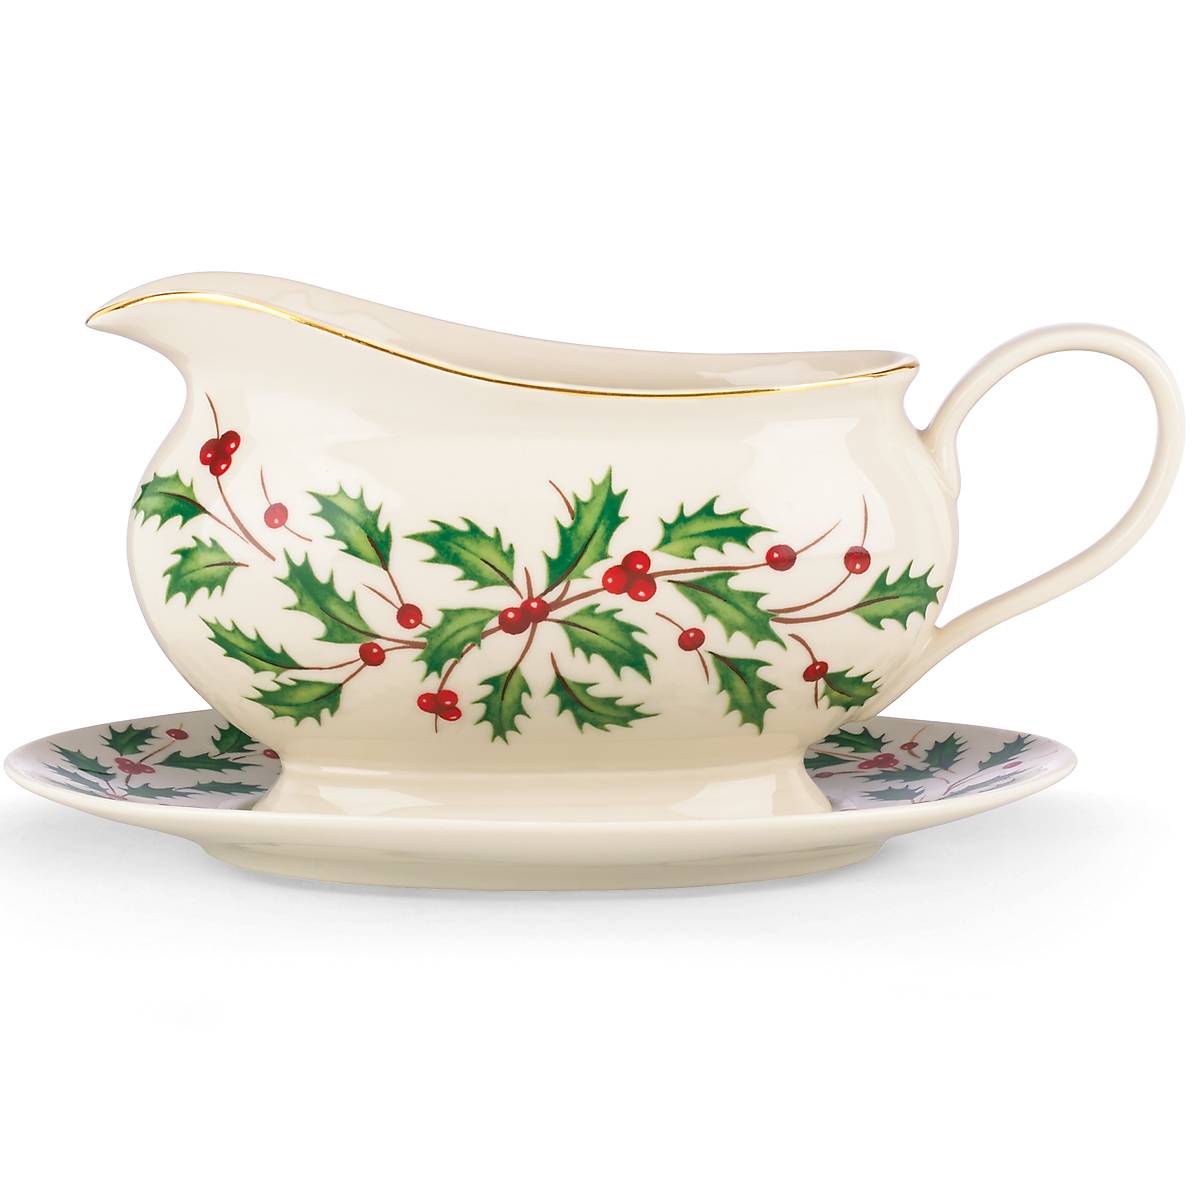 White 830408 Lenox Soiltaire Sauce Boat and Stand 